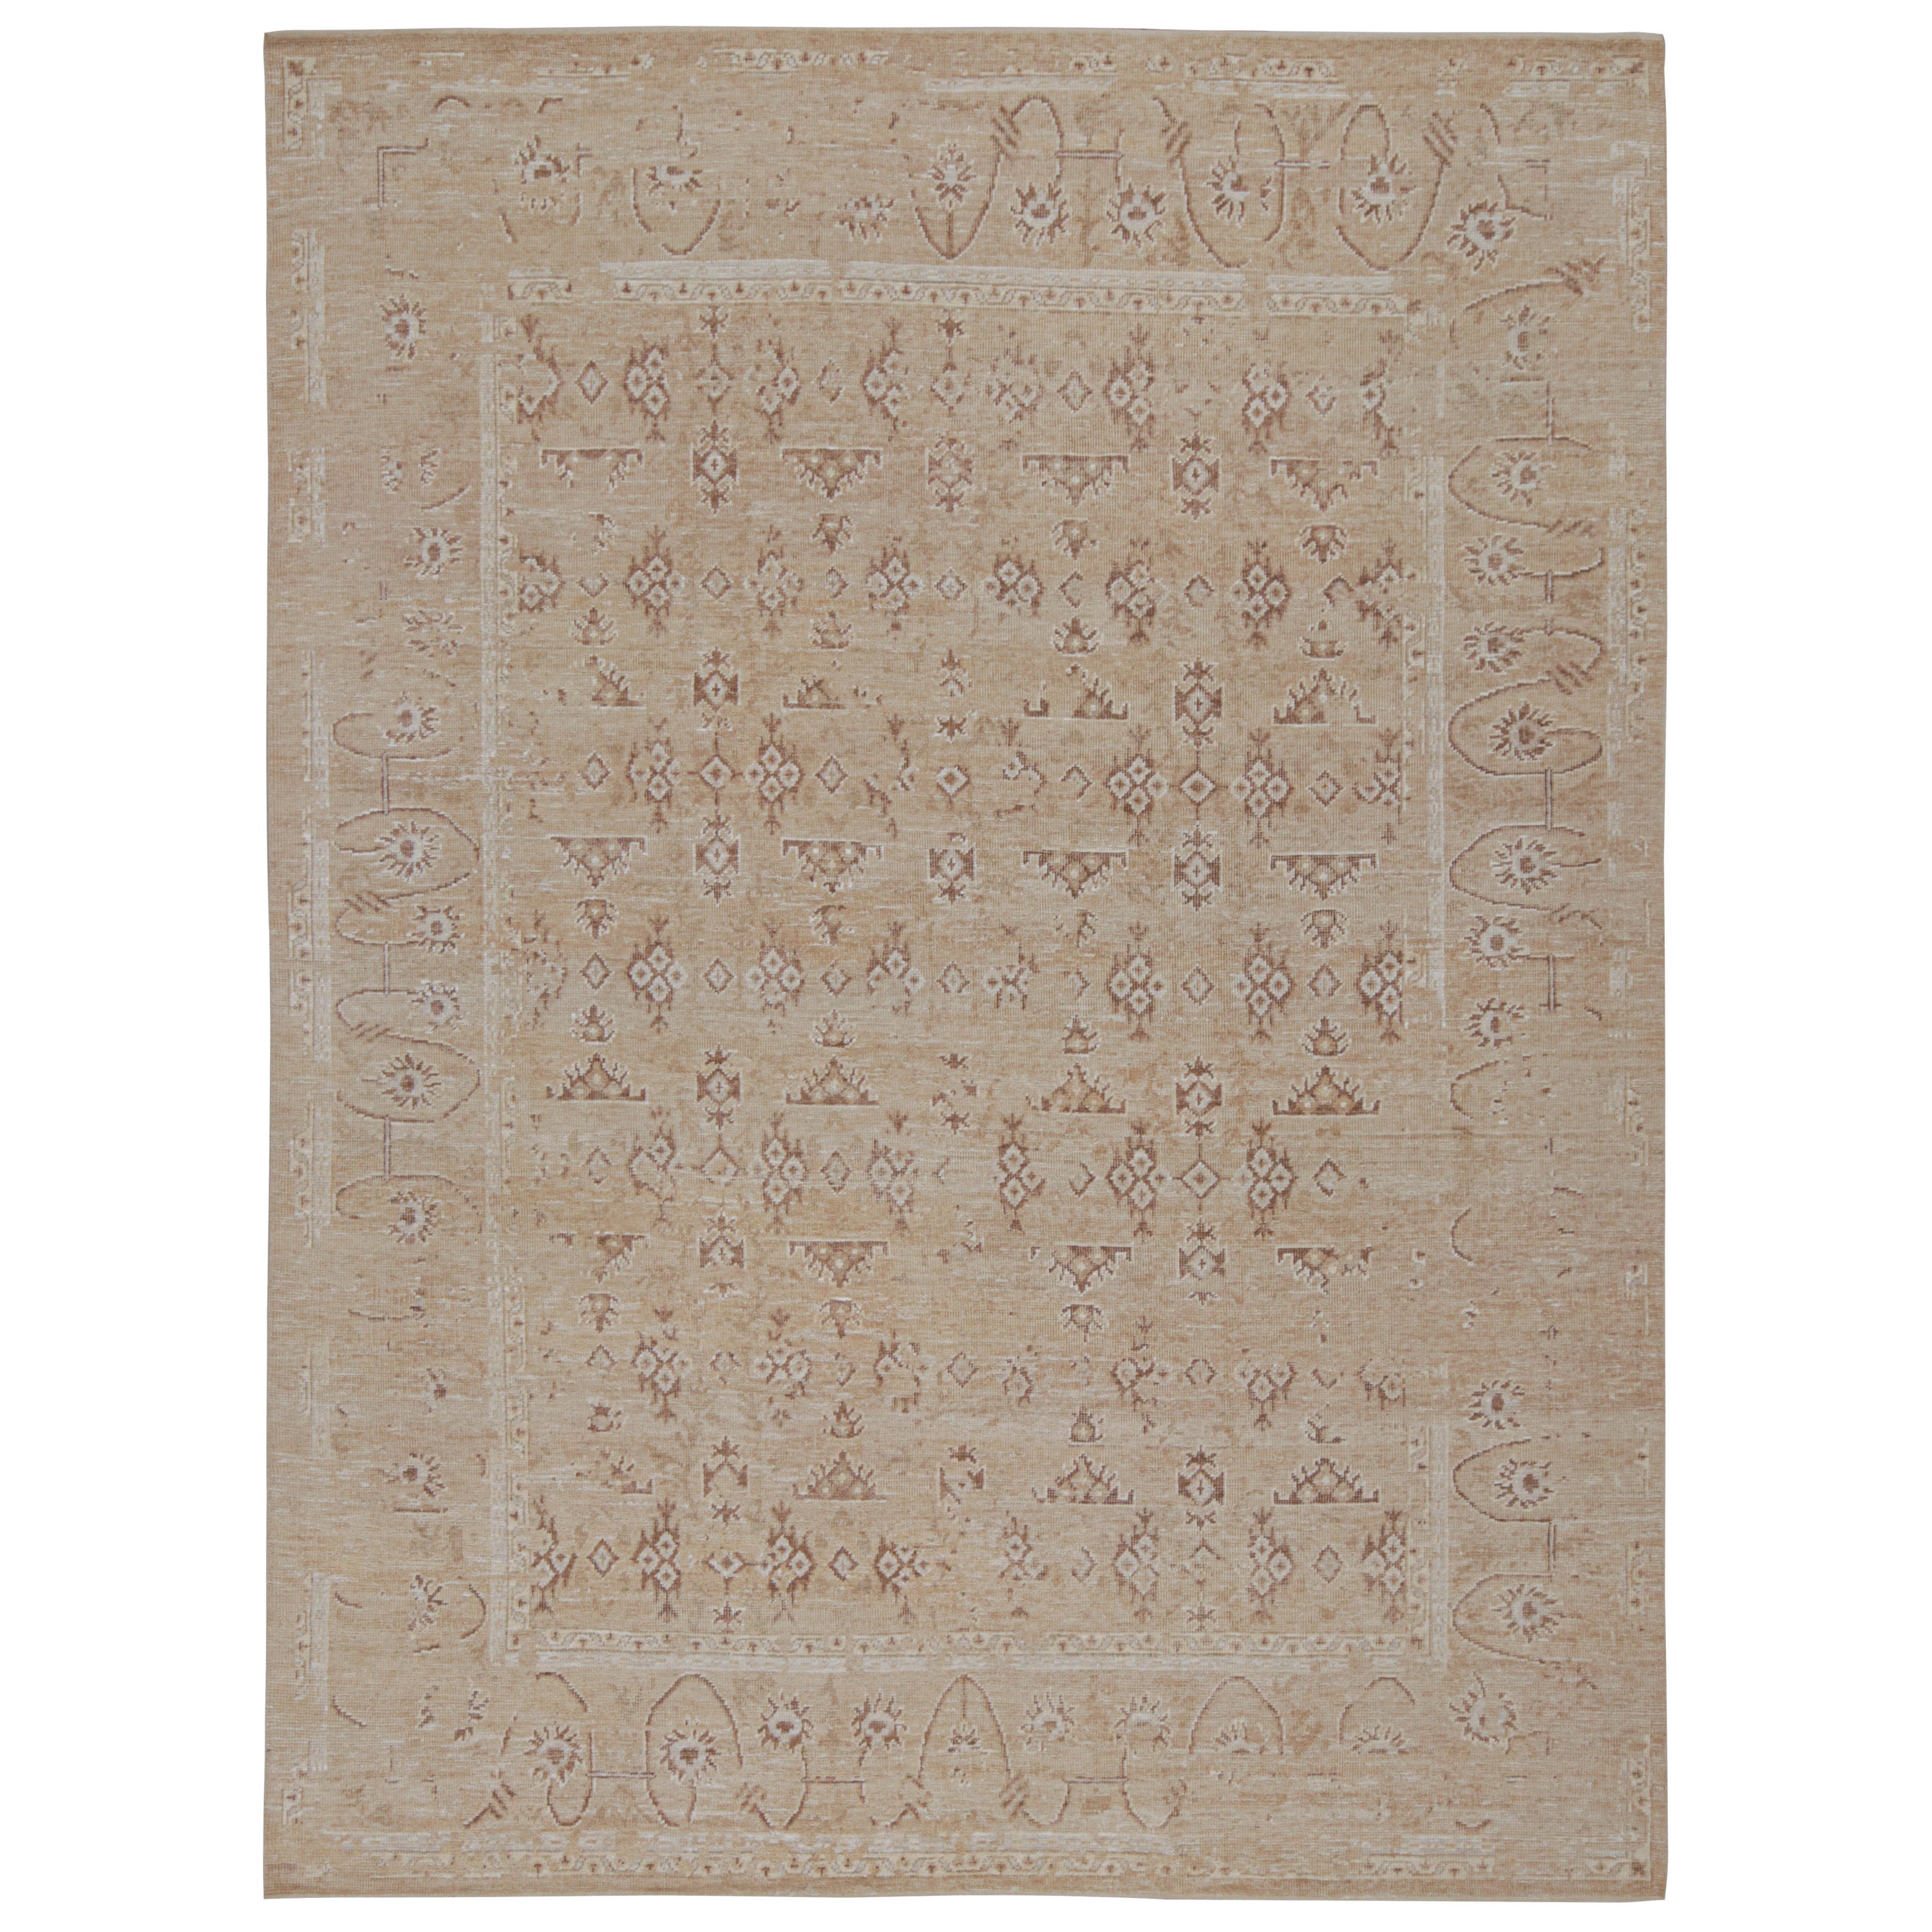 Rug & Kilim’s Oushak Style Rug with Floral Patterns in Tones of Brown